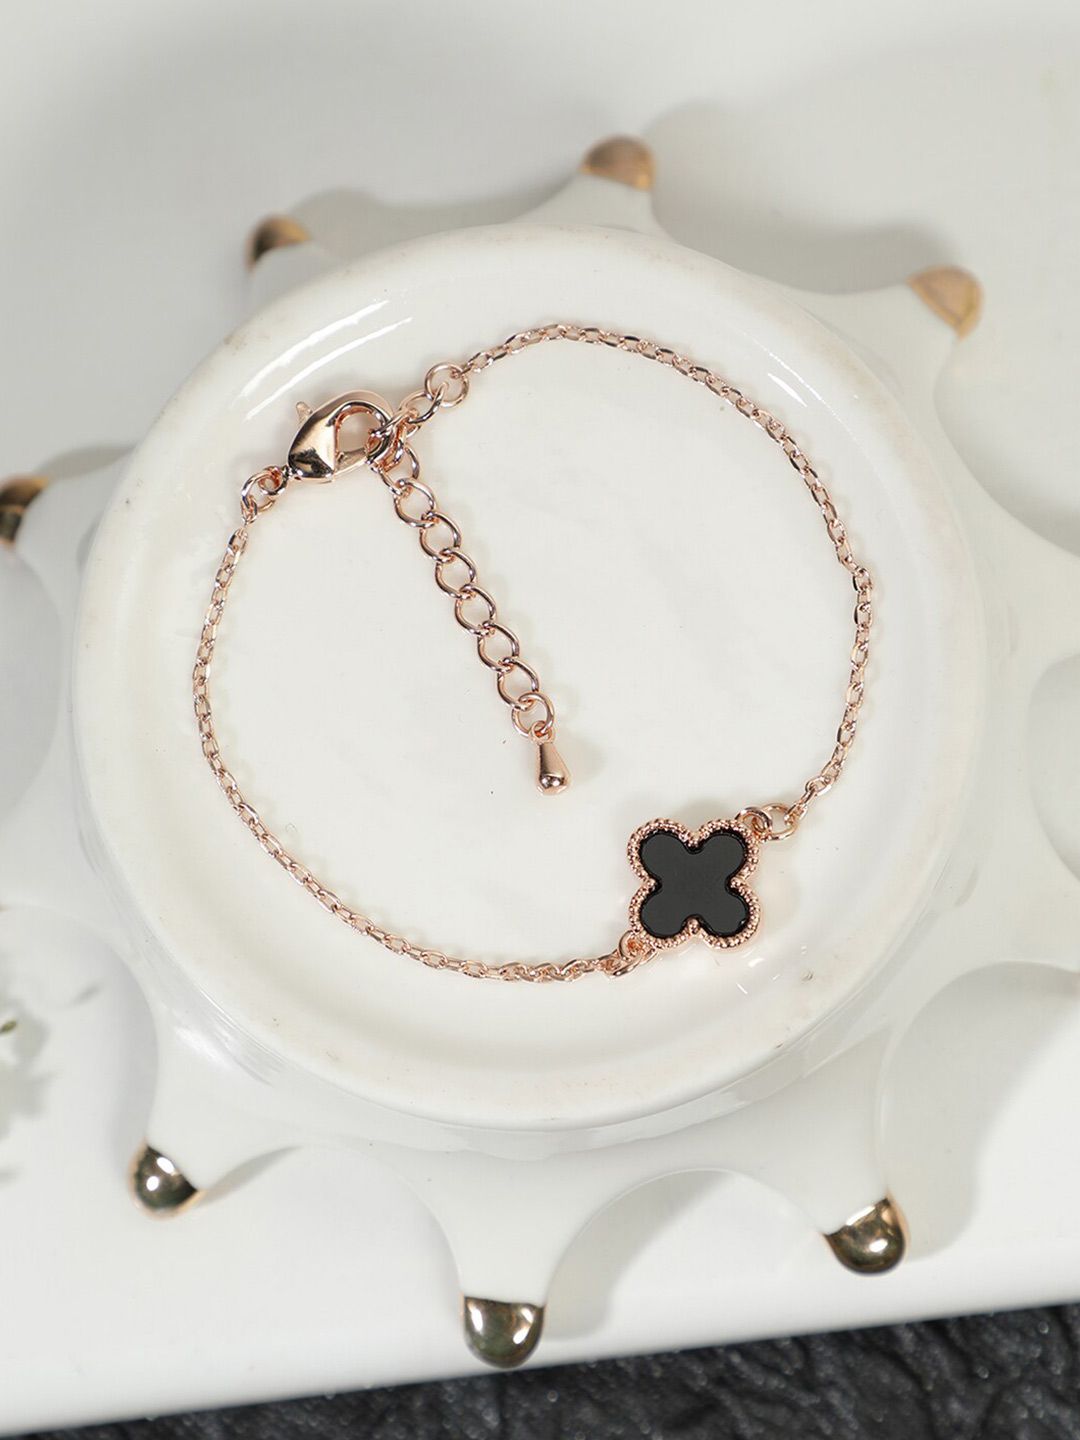 AQUASTREET Rose Gold-Plated Enamelled Charm Bracelet Price in India